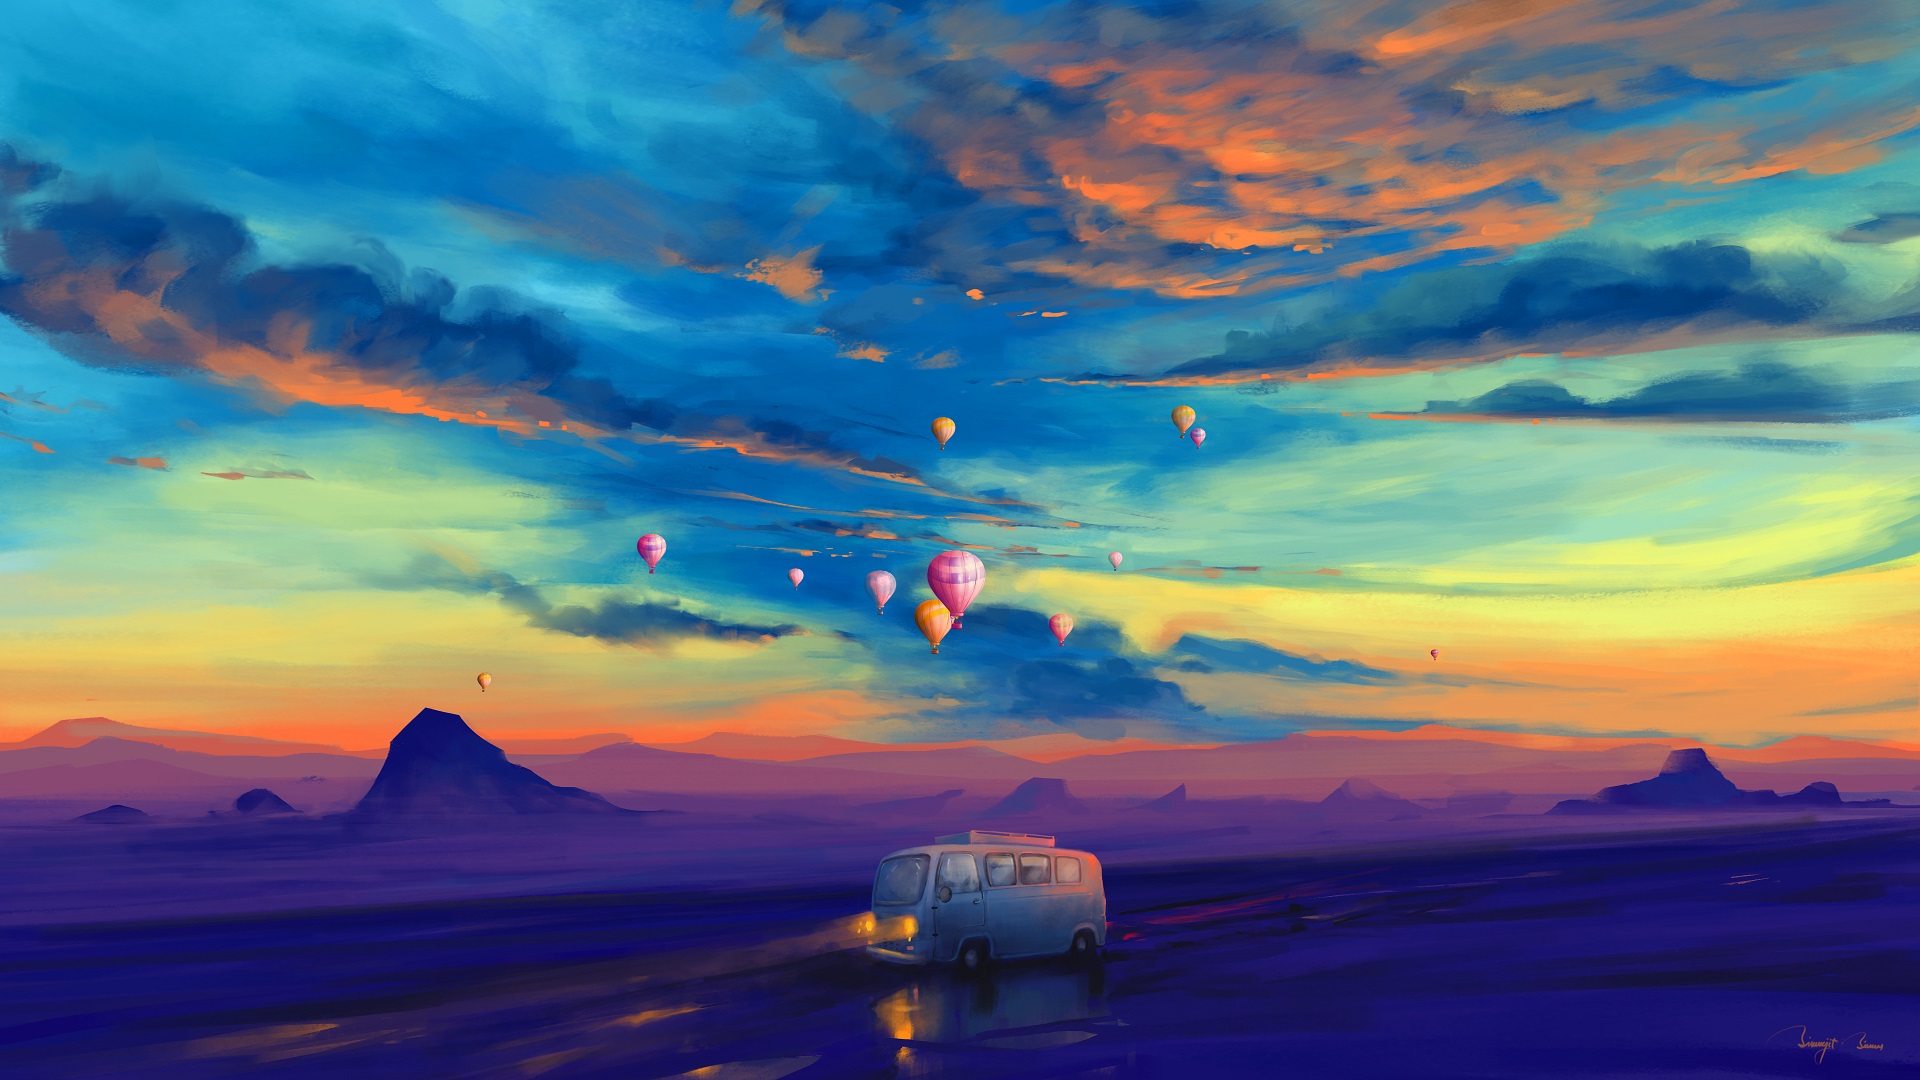 General 1920x1080 BisBiswas balloon hot air balloons mountains transport night evening clouds illustration painting digital art signature